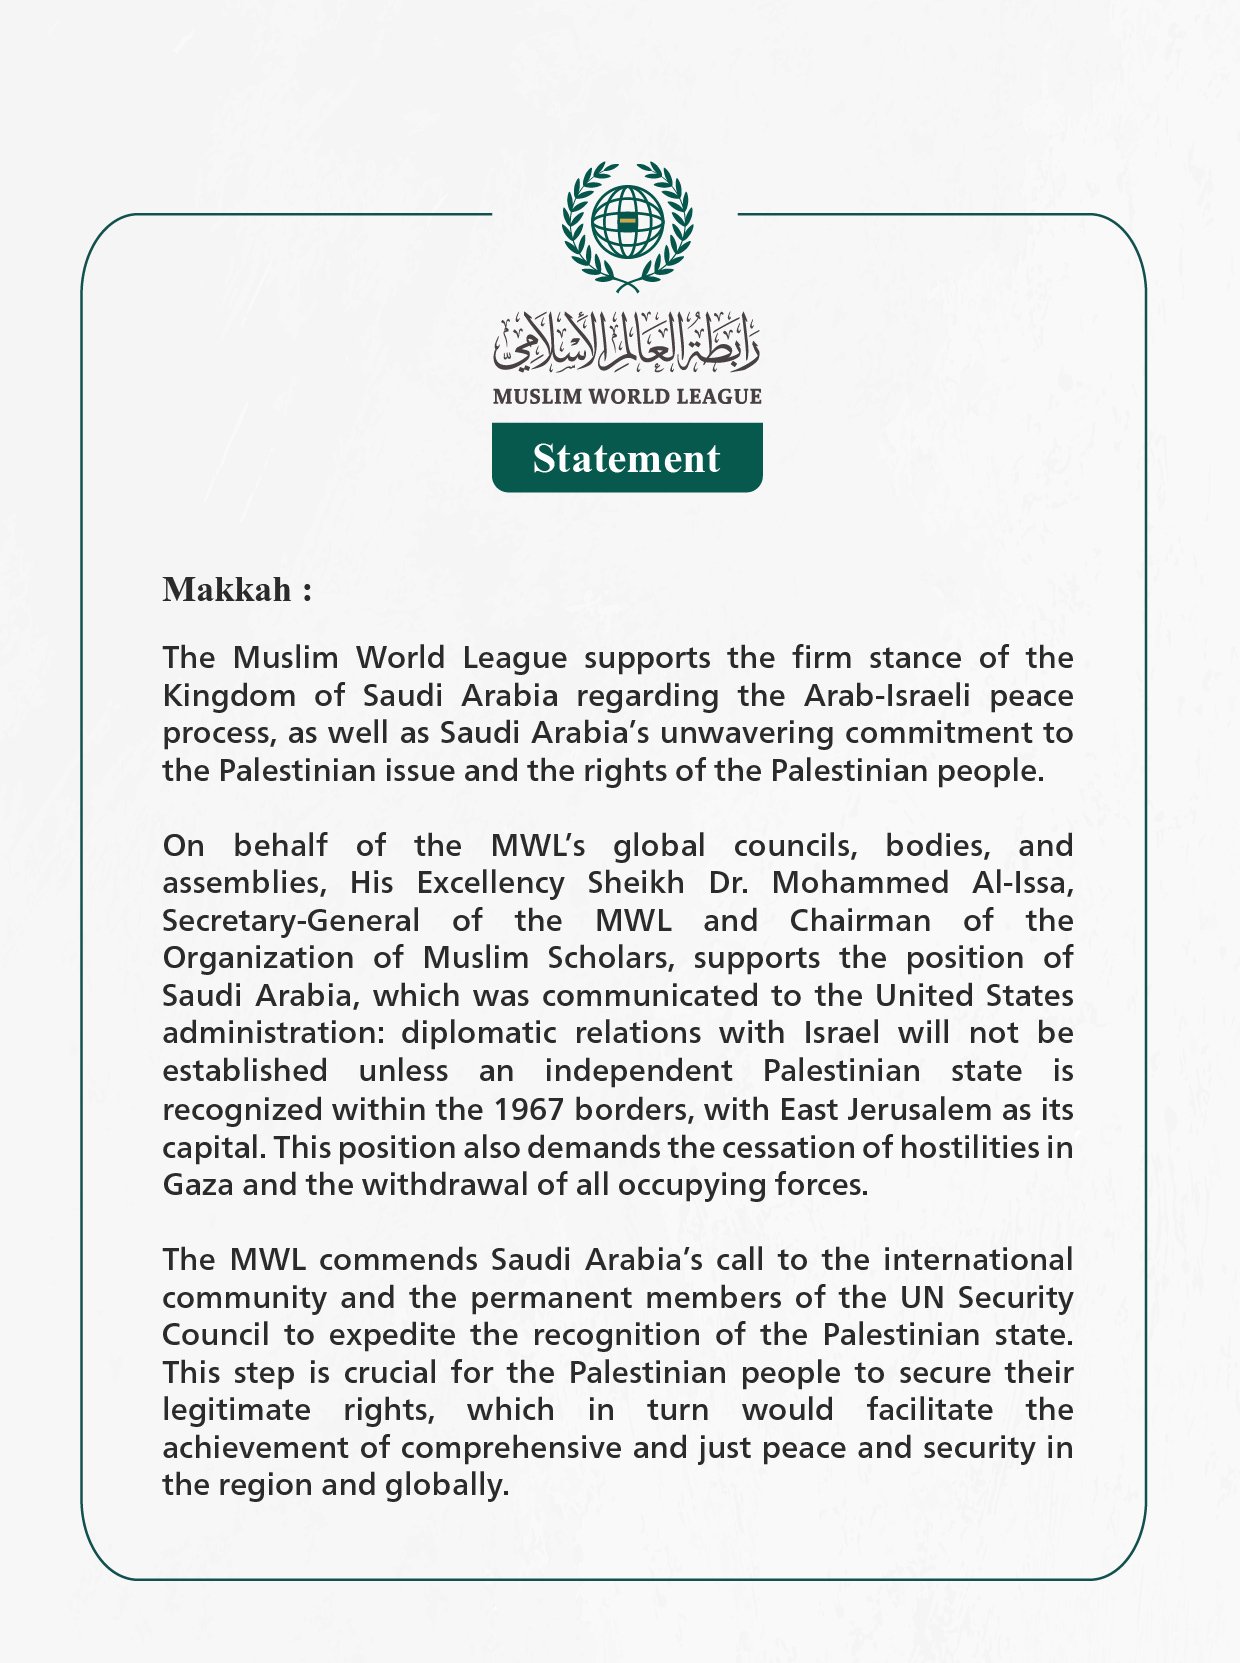 The Muslim World League Commends the Firm Stance of the Kingdom of Saudi Arabia towards the Palestinian Issue